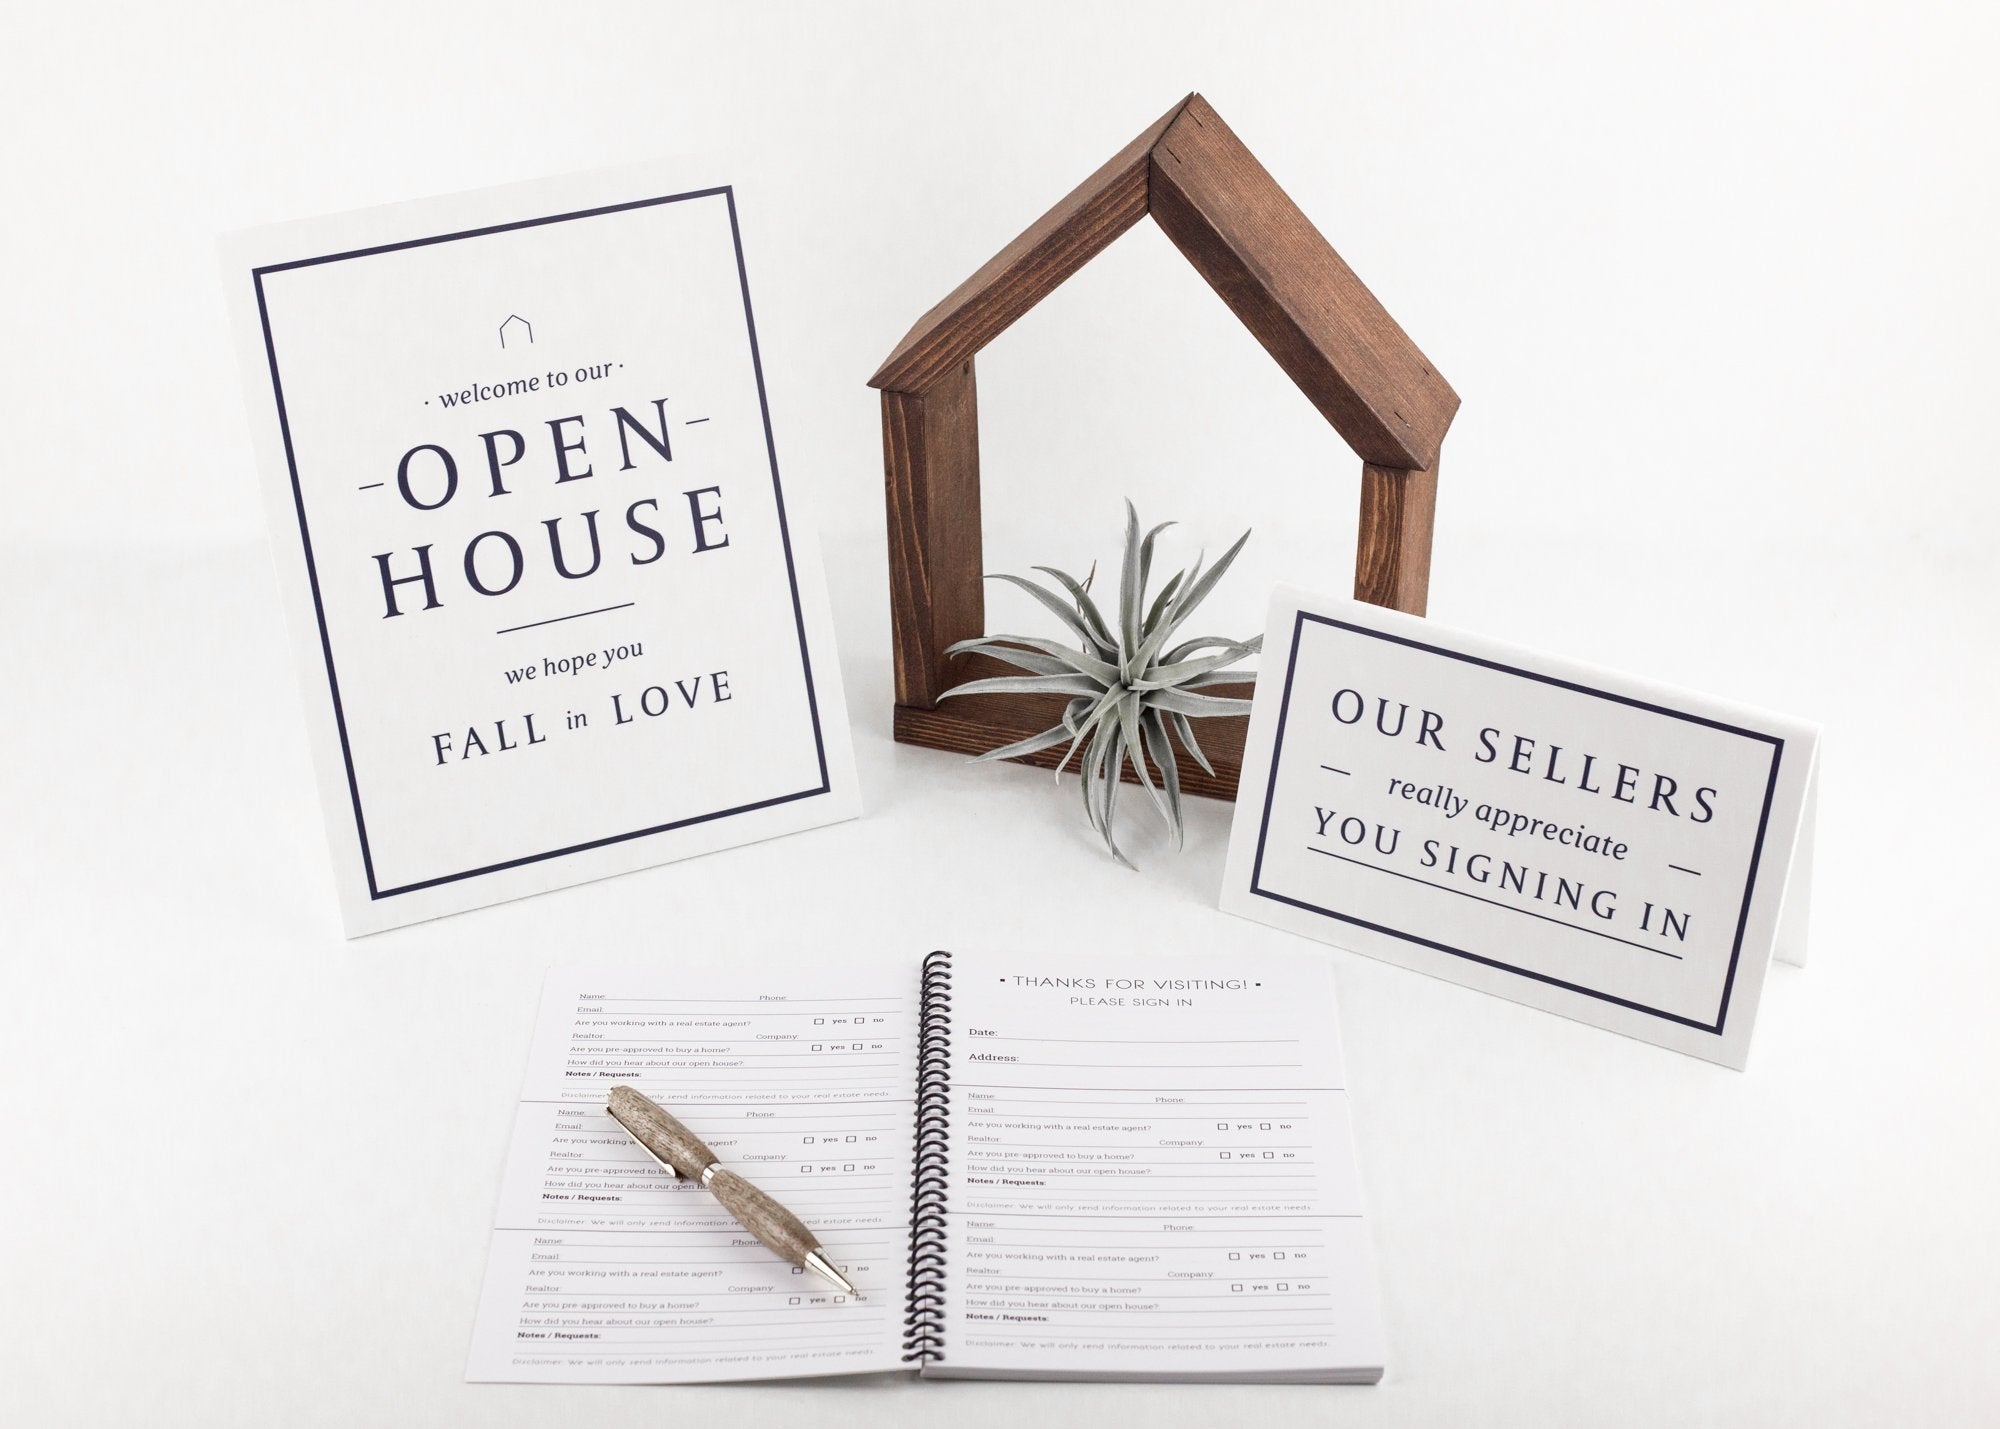 An open house bundle from All Things Real Estate